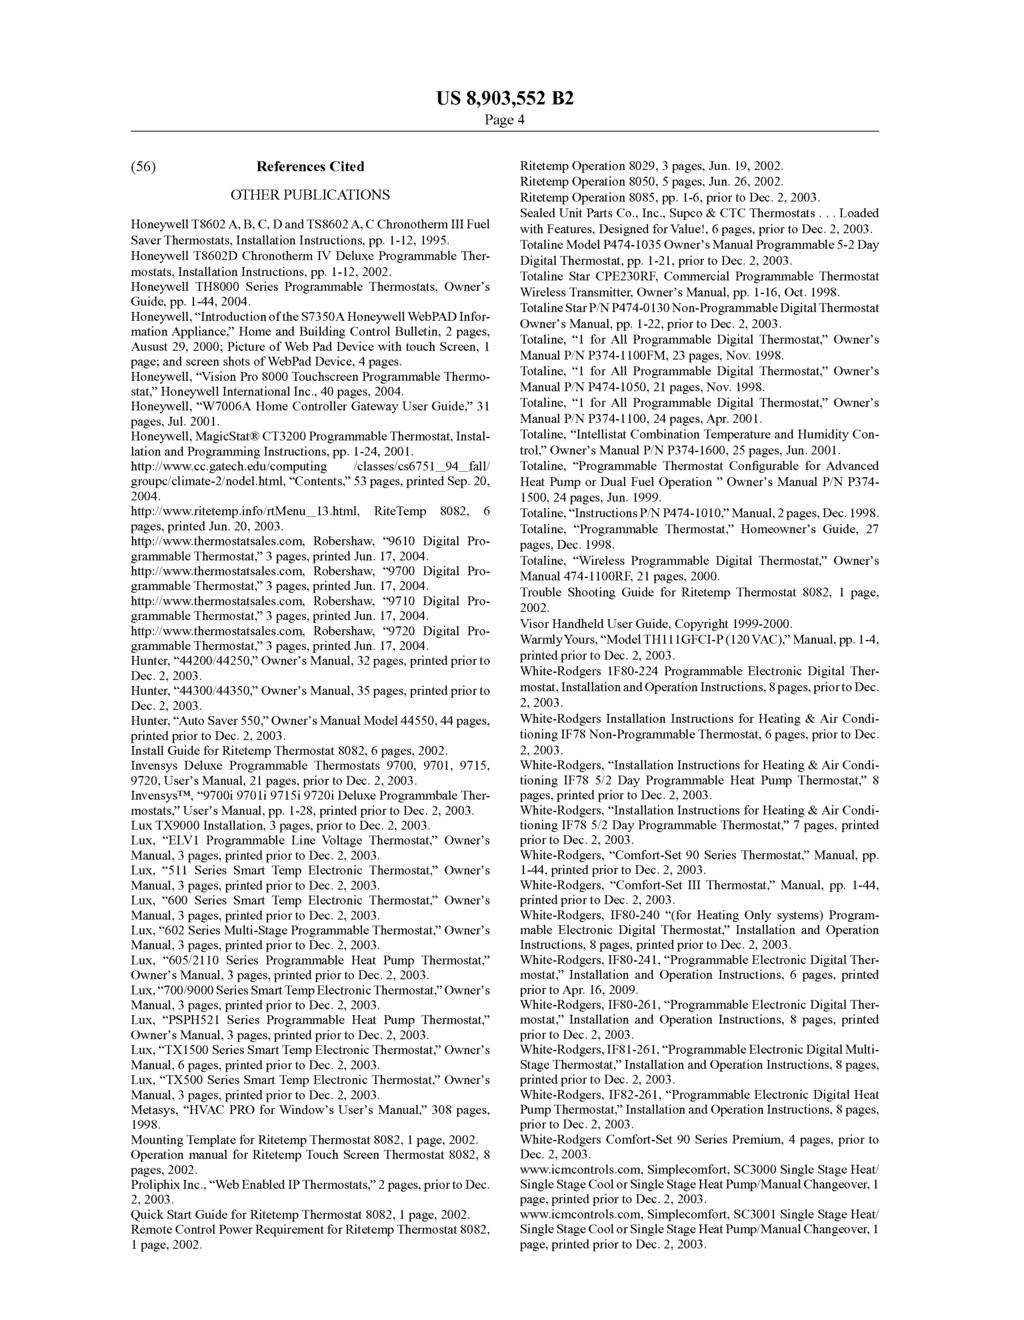 US 8,903.552 B2 Page 4 (56) References Cited OTHER PUBLICATIONS Honeywell T8602 A, B, C, D and TS8602A, C Chronotherm III Fuel Saver Thermostats, Installation Instructions, pp. 1-12, 1995.